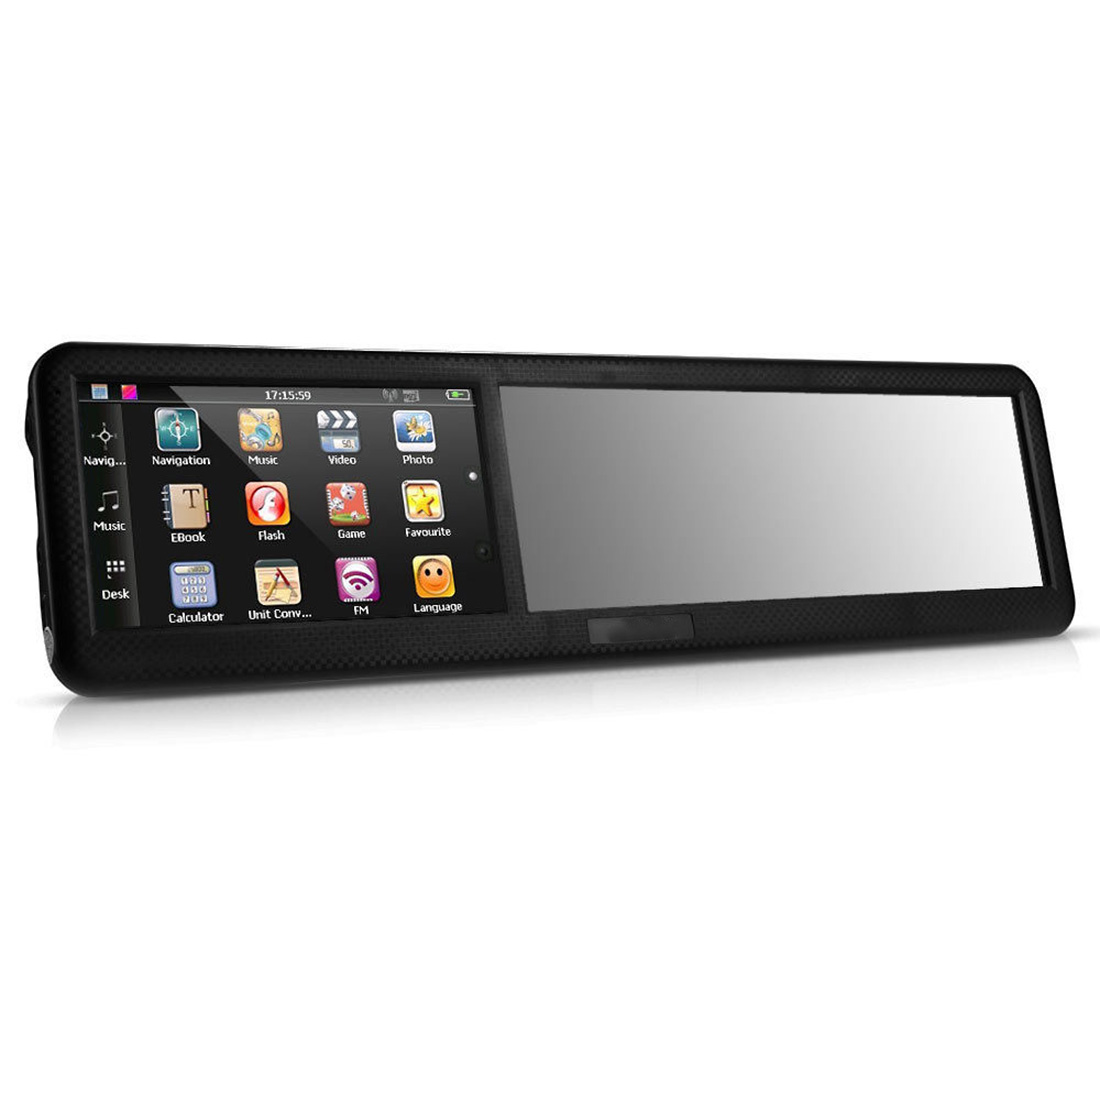 Hot Sale Black 4 3 inch HD touch screen Rearview Mirror ABS Car GPS Navigation Navigator